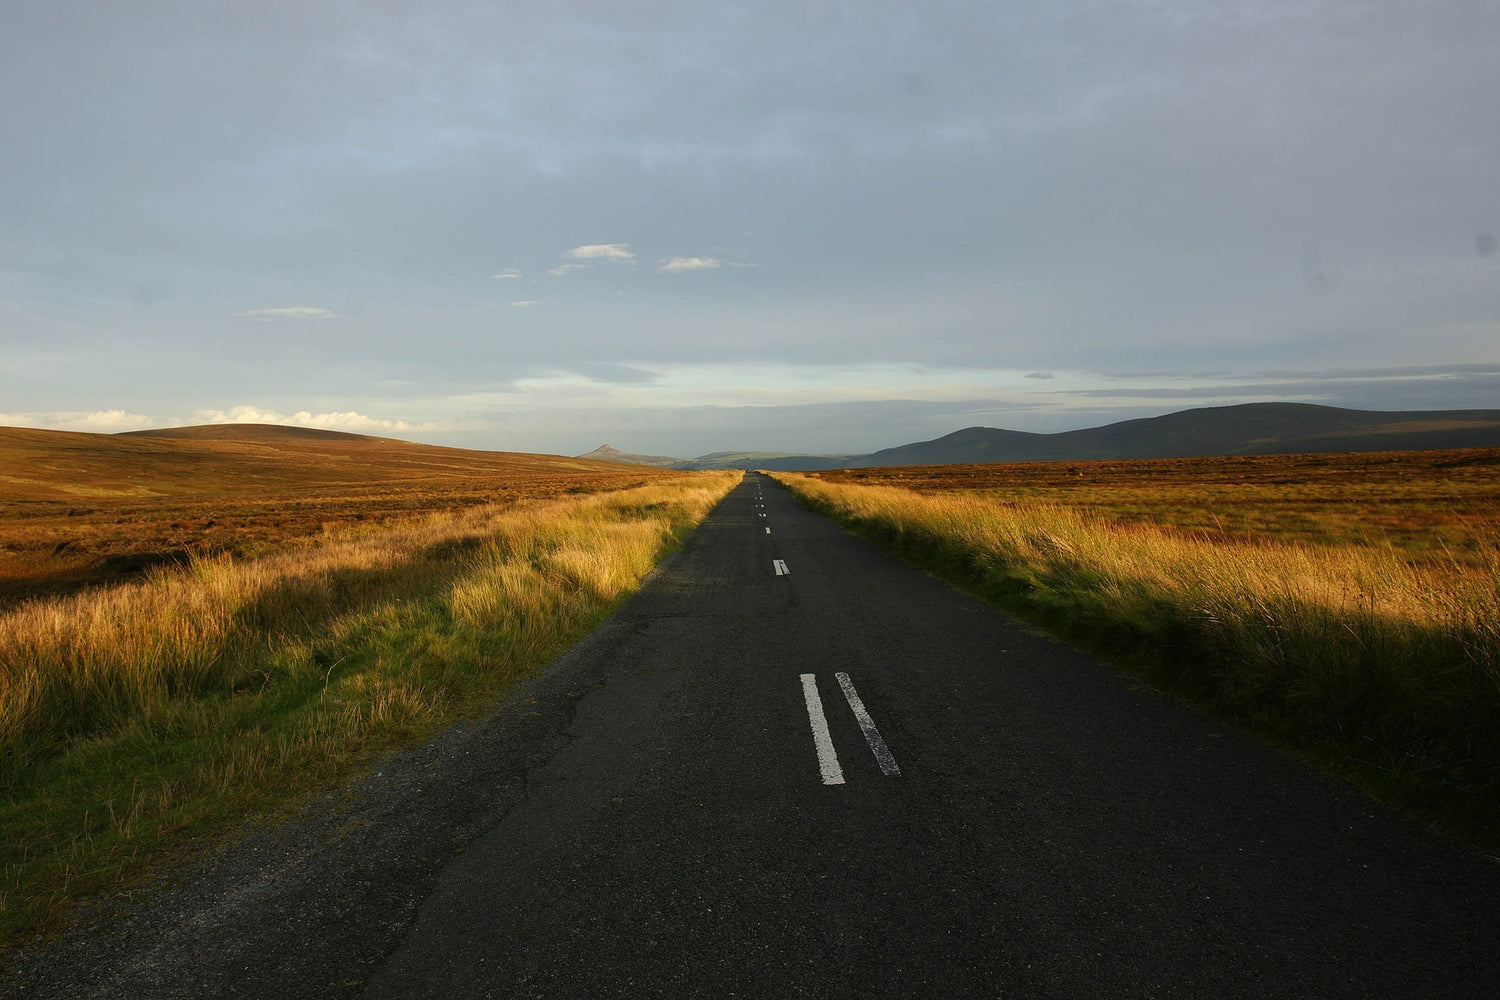 A clean empty country road flanked either side by mountain moorlands. Sunset shines through the glass.